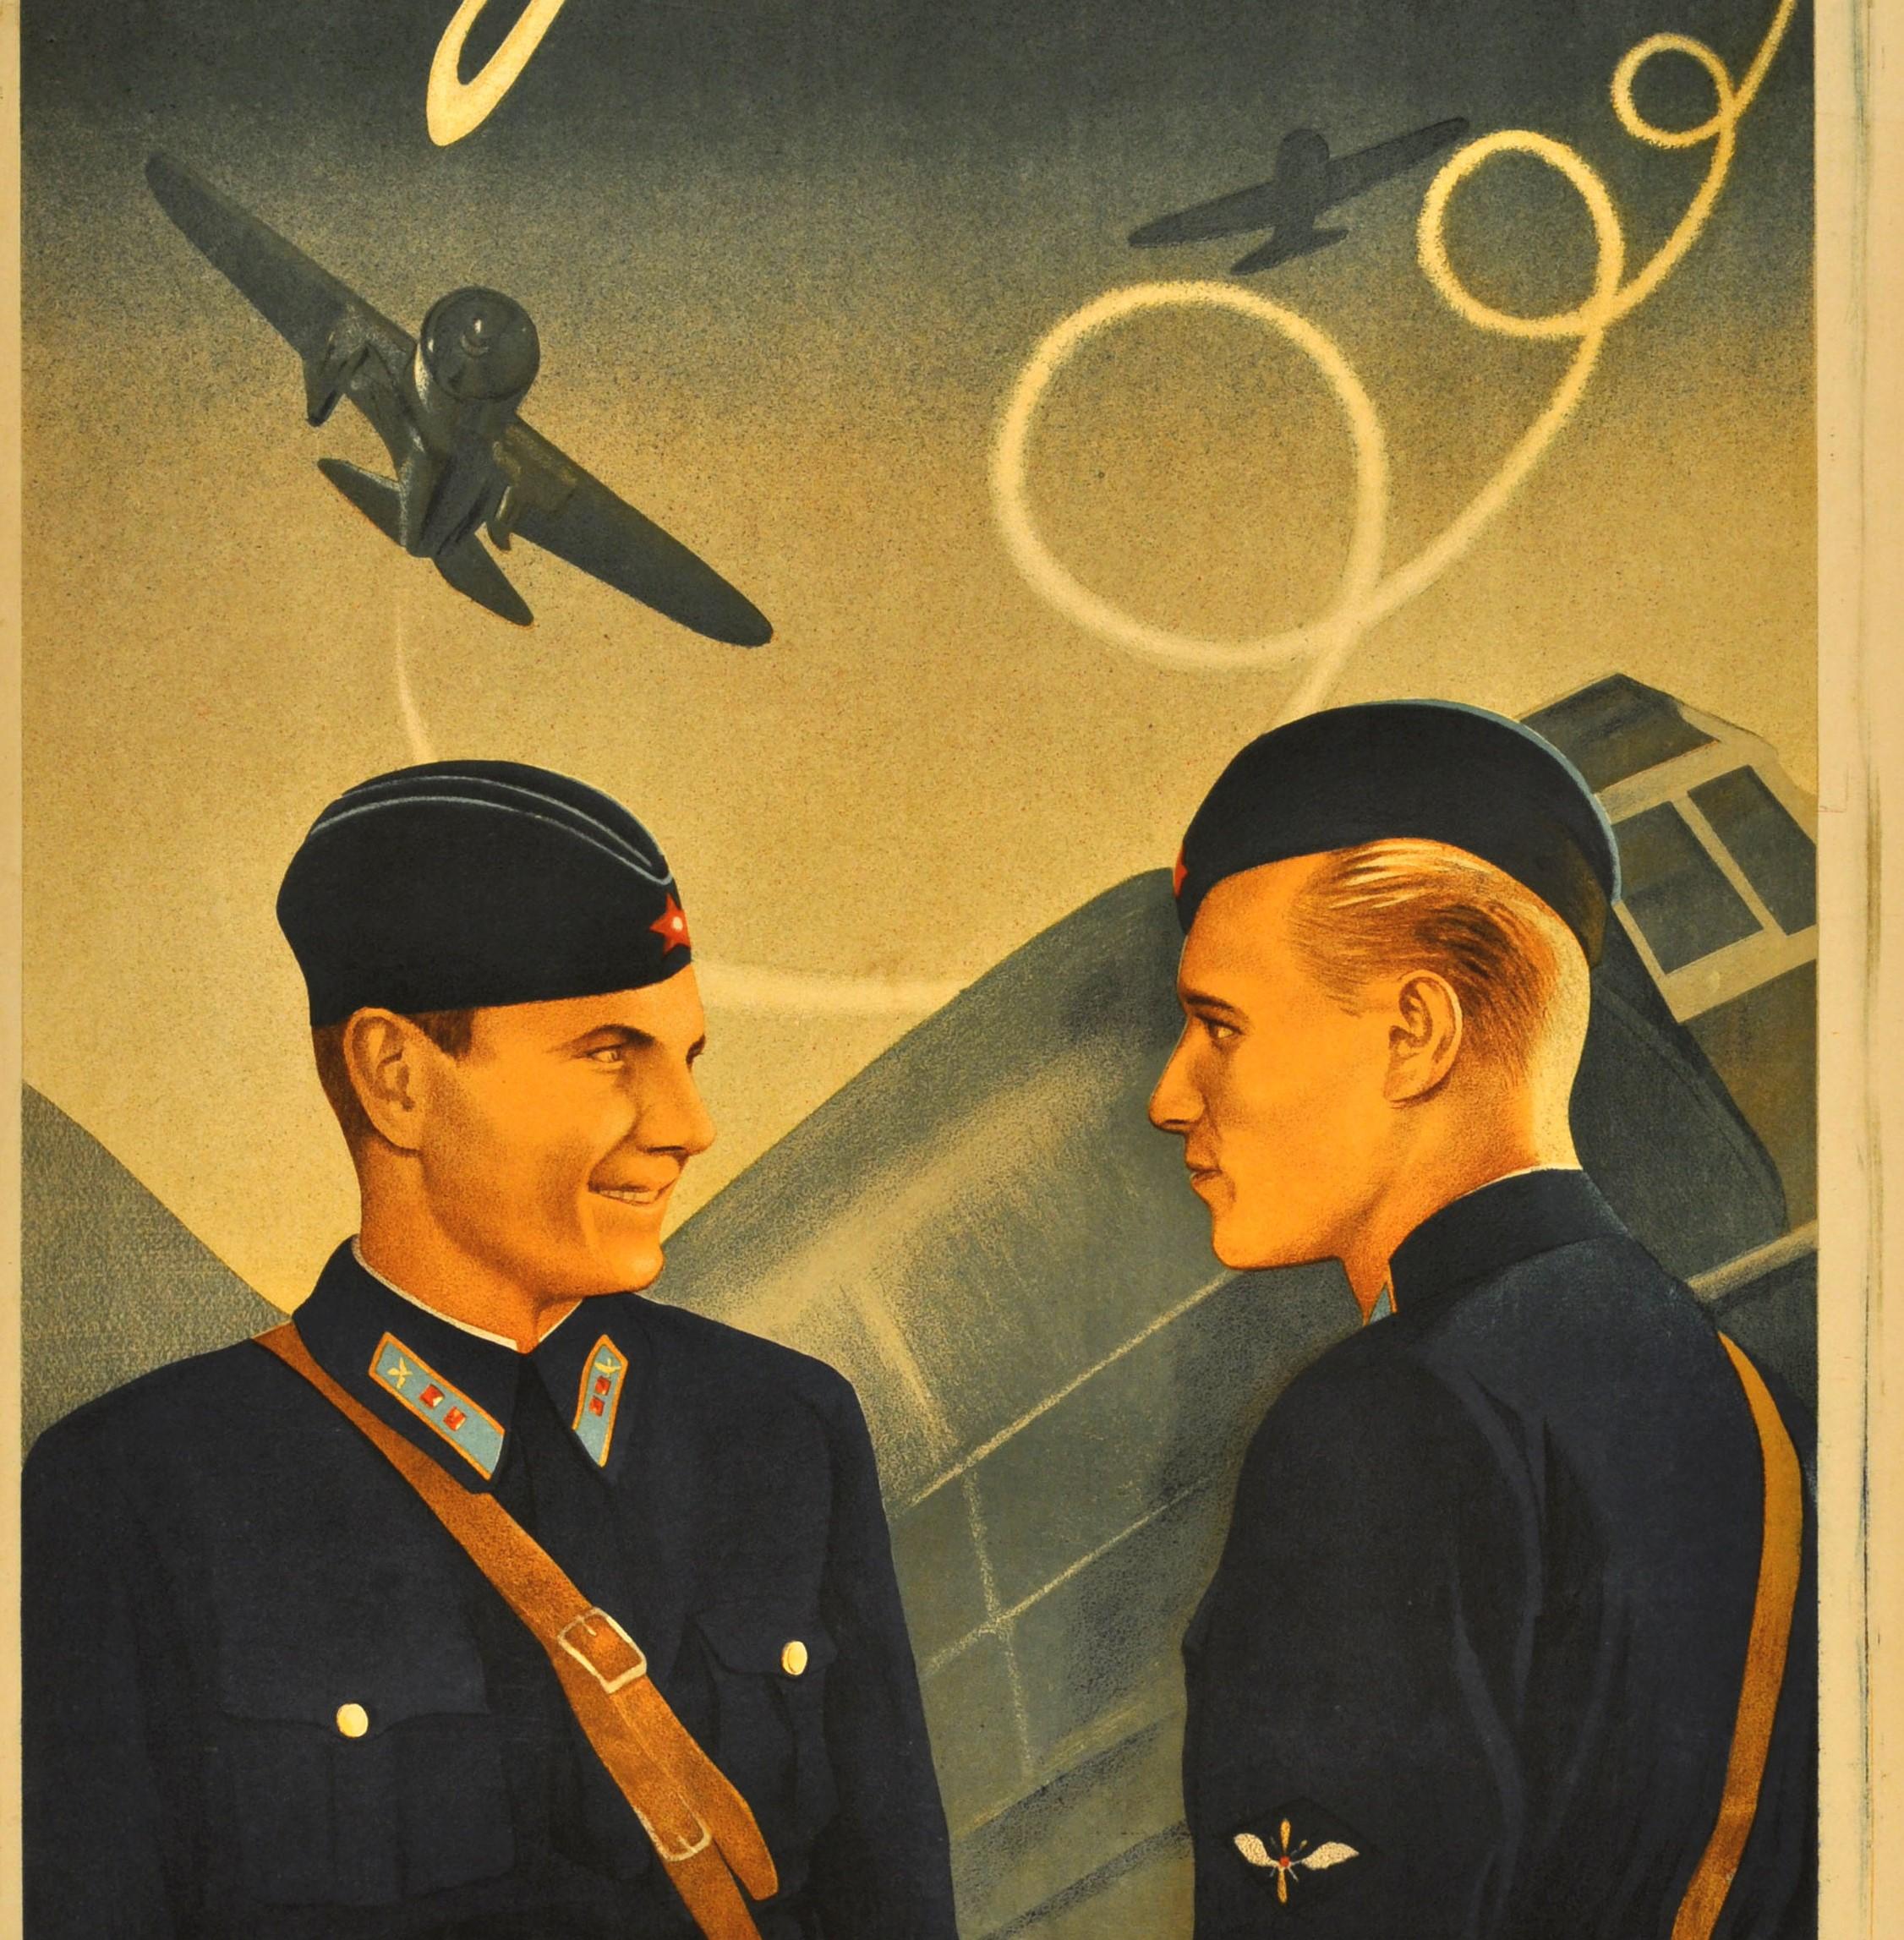 Original Rare Movie Poster for a Film about the Soviet Air Force Fighter Pilots - Brown Print by Unknown